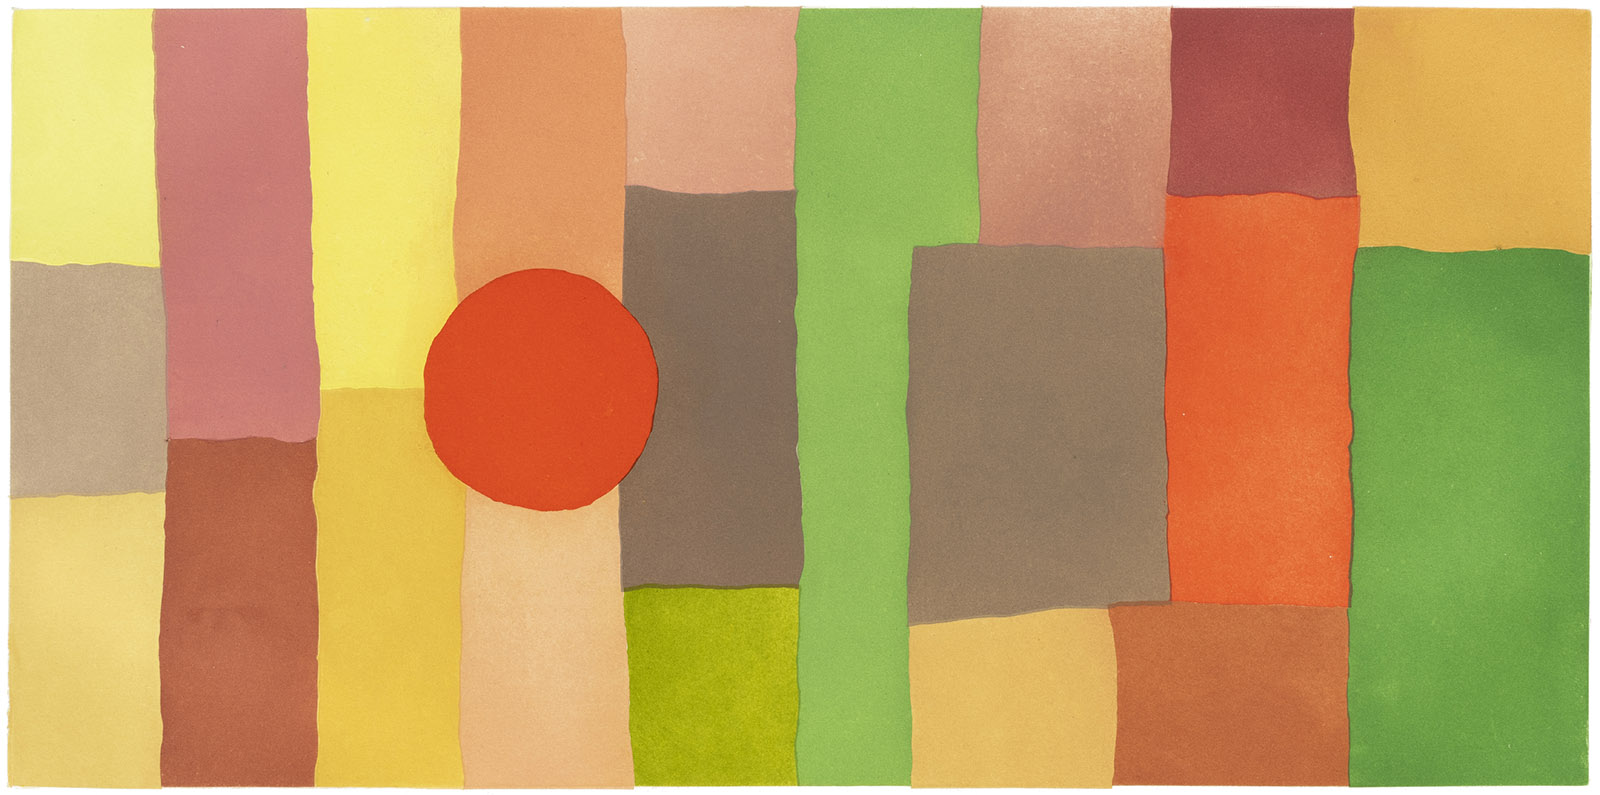 Journey; painting by Etel Adnan